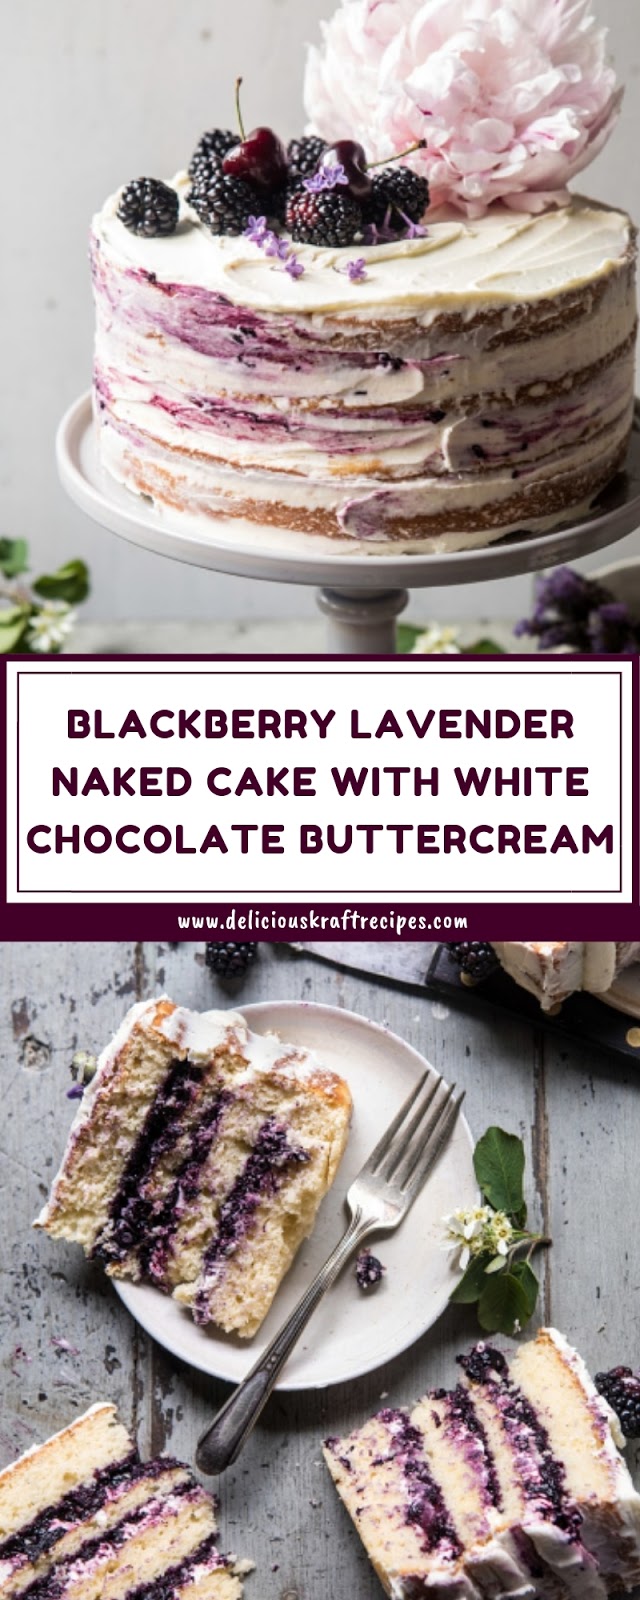 BLACKBERRY LAVENDER NAKED CAKE WITH WHITE CHOCOLATE BUTTERCREAM